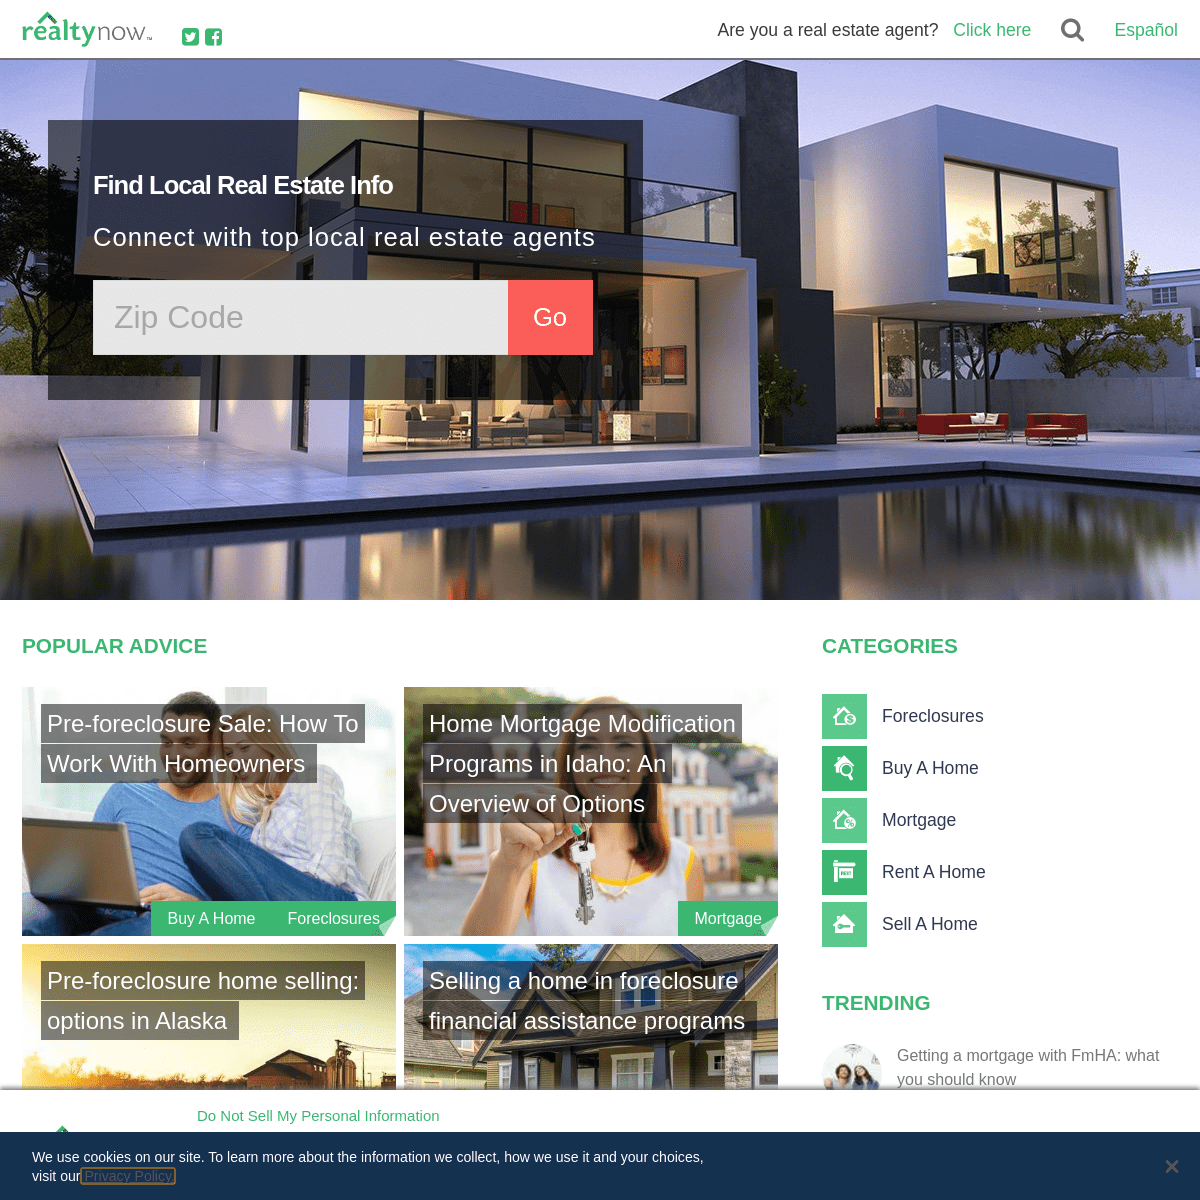 A complete backup of realtynow.com